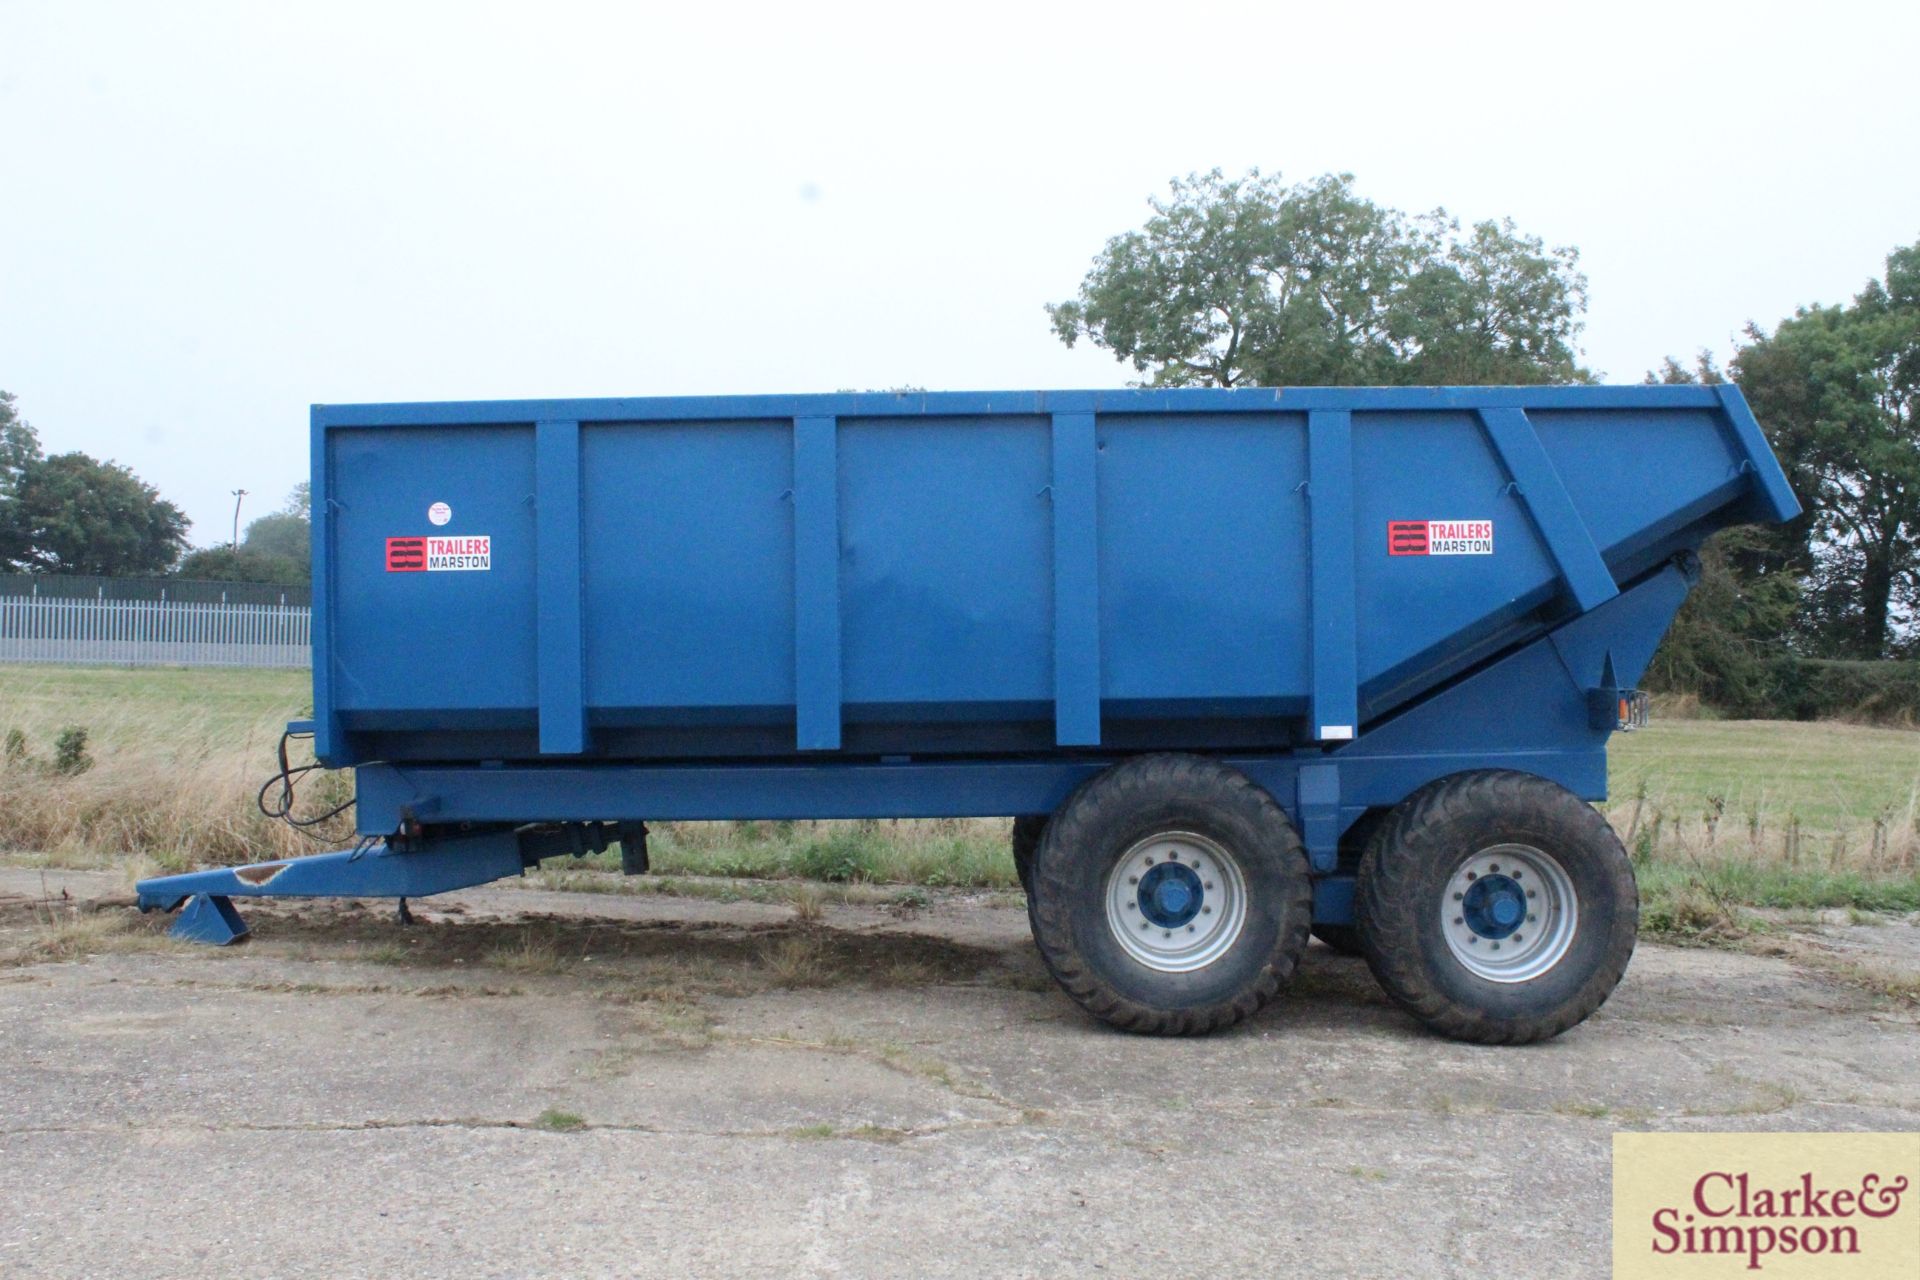 AS Marston ACE14D 14T twin axle dump trailer. 03/2011. Serial number 217341. With oil brakes, - Image 8 of 26